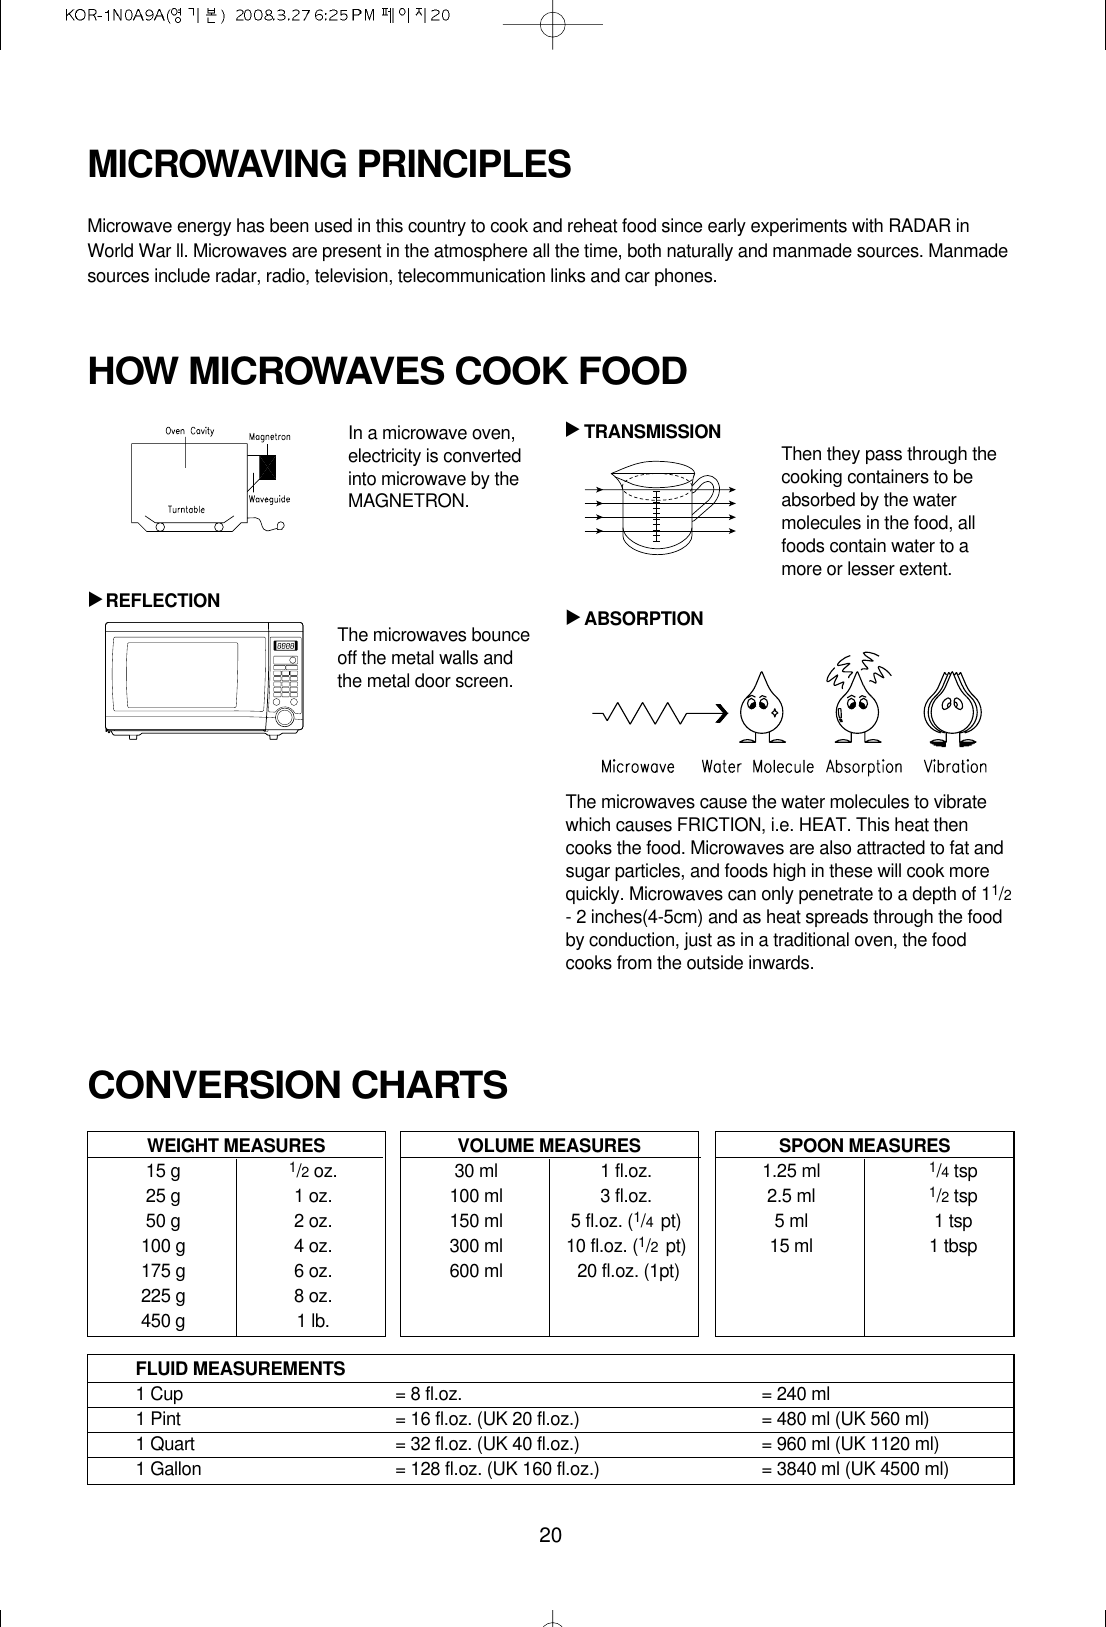 20MICROWAVING PRINCIPLESMicrowave energy has been used in this country to cook and reheat food since early experiments with RADAR inWorld War ll. Microwaves are present in the atmosphere all the time, both naturally and manmade sources. Manmadesources include radar, radio, television, telecommunication links and car phones.CONVERSION CHARTSIn a microwave oven,electricity is convertedinto microwave by theMAGNETRON.REFLECTIONTRANSMISSION Then they pass through thecooking containers to beabsorbed by the watermolecules in the food, allfoods contain water to amore or lesser extent.ABSORPTIONThe microwaves cause the water molecules to vibratewhich causes FRICTION, i.e. HEAT. This heat thencooks the food. Microwaves are also attracted to fat andsugar particles, and foods high in these will cook morequickly. Microwaves can only penetrate to a depth of 11/2- 2 inches(4-5cm) and as heat spreads through the foodby conduction, just as in a traditional oven, the foodcooks from the outside inwards.WEIGHT MEASURES15 g 1/2oz.25 g 1 oz.50 g 2 oz.100 g 4 oz.175 g 6 oz.225 g 8 oz.450 g 1 lb.HOW MICROWAVES COOK FOOD▲▲▲VOLUME MEASURES30 ml 1 fl.oz.100 ml 3 fl.oz.150 ml 5 fl.oz. (1/4pt)300 ml 10 fl.oz. (1/2pt)600 ml 20 fl.oz. (1pt)SPOON MEASURES1.25 ml 1/4tsp2.5 ml 1/2tsp5 ml 1 tsp15 ml 1 tbspFLUID MEASUREMENTS1 Cup = 8 fl.oz. = 240 ml1 Pint = 16 fl.oz. (UK 20 fl.oz.) = 480 ml (UK 560 ml)1 Quart = 32 fl.oz. (UK 40 fl.oz.) = 960 ml (UK 1120 ml)1 Gallon = 128 fl.oz. (UK 160 fl.oz.) = 3840 ml (UK 4500 ml)The microwaves bounceoff the metal walls andthe metal door screen.